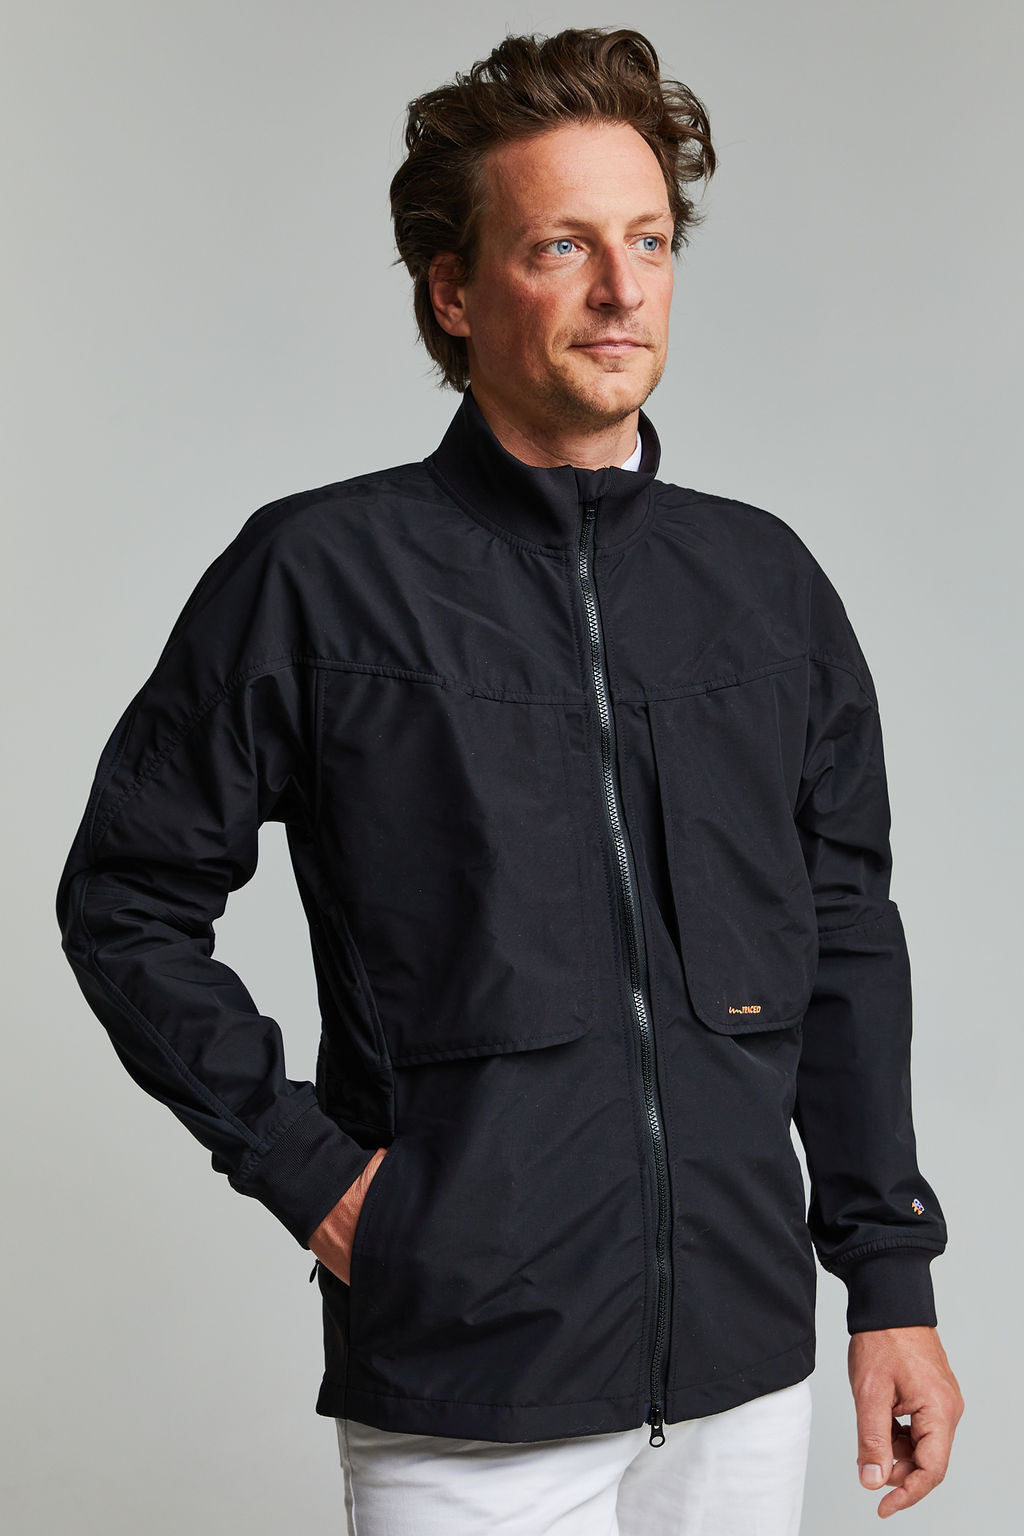 Technical Golf Jacket Men. Recycled bluesign approved